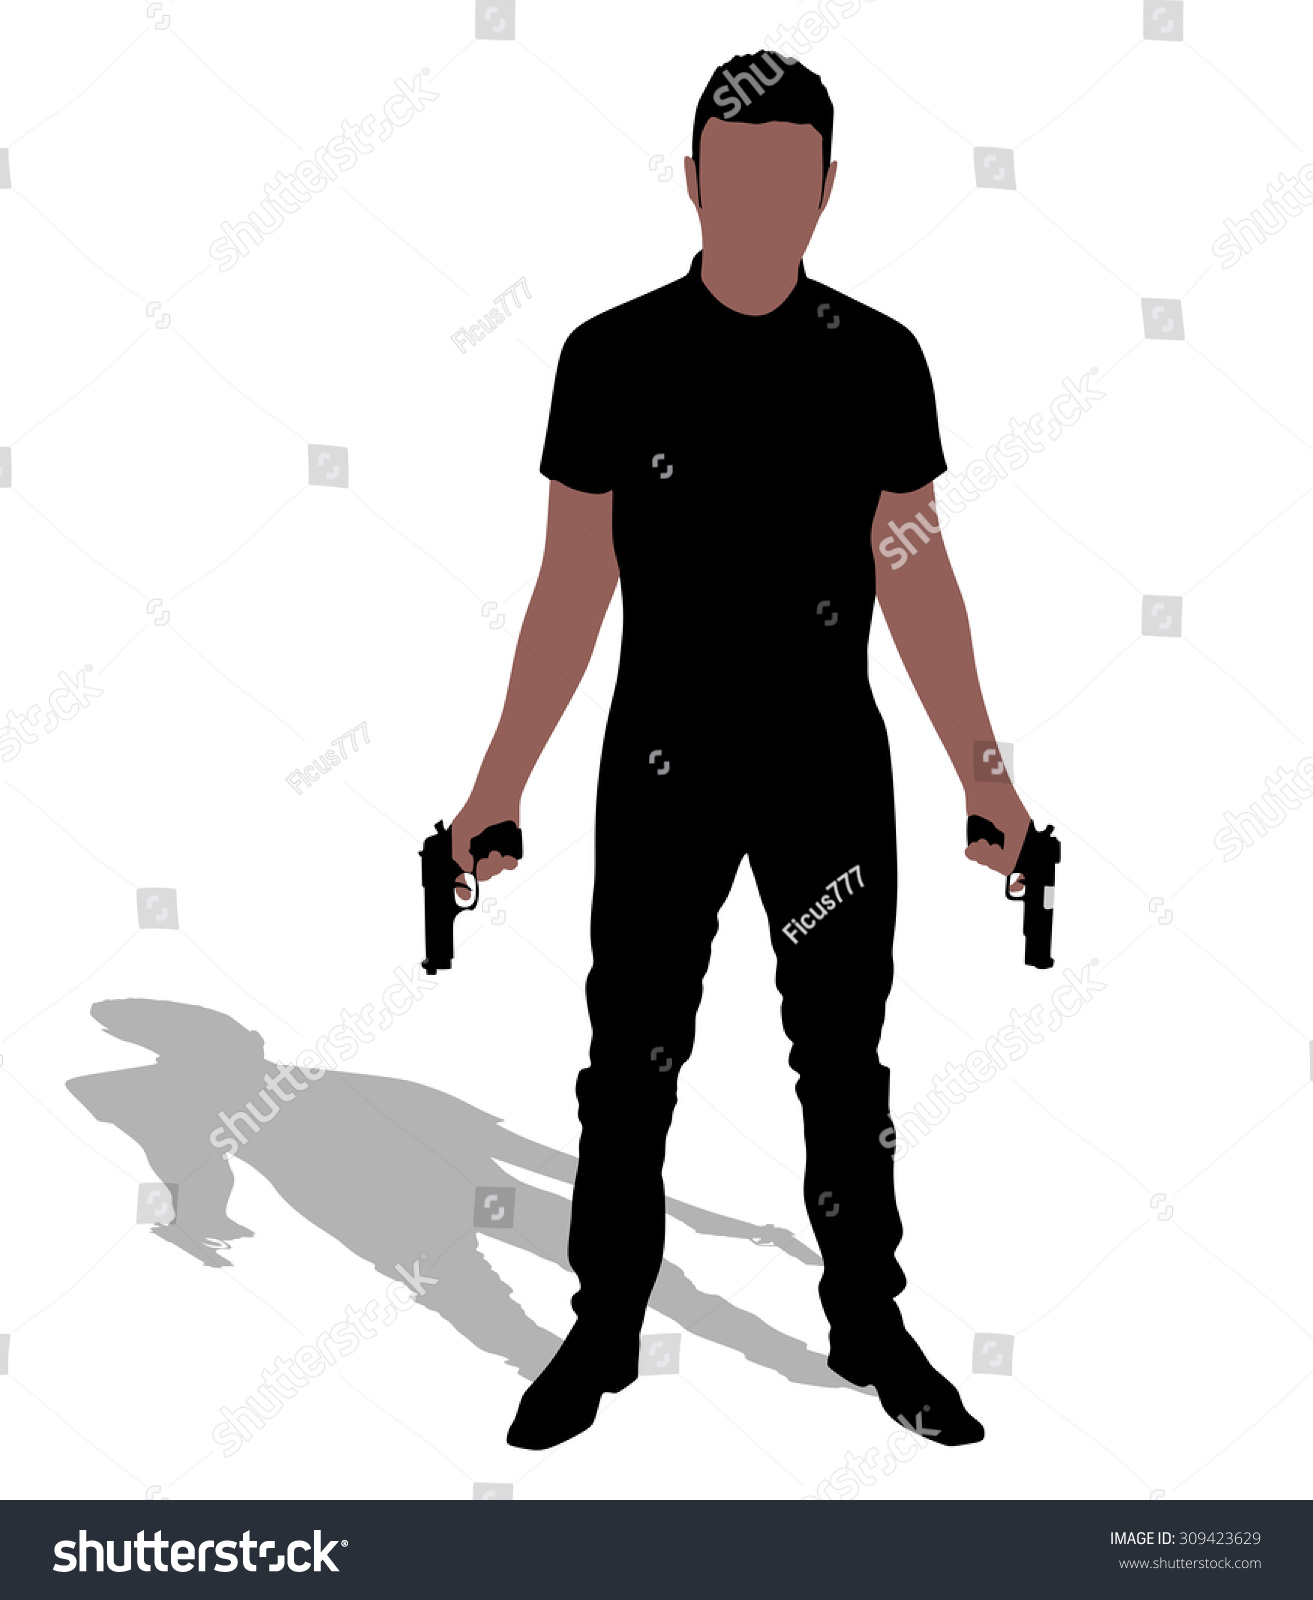 Man With Two Guns, Vector - 309423629 : Shutterstock